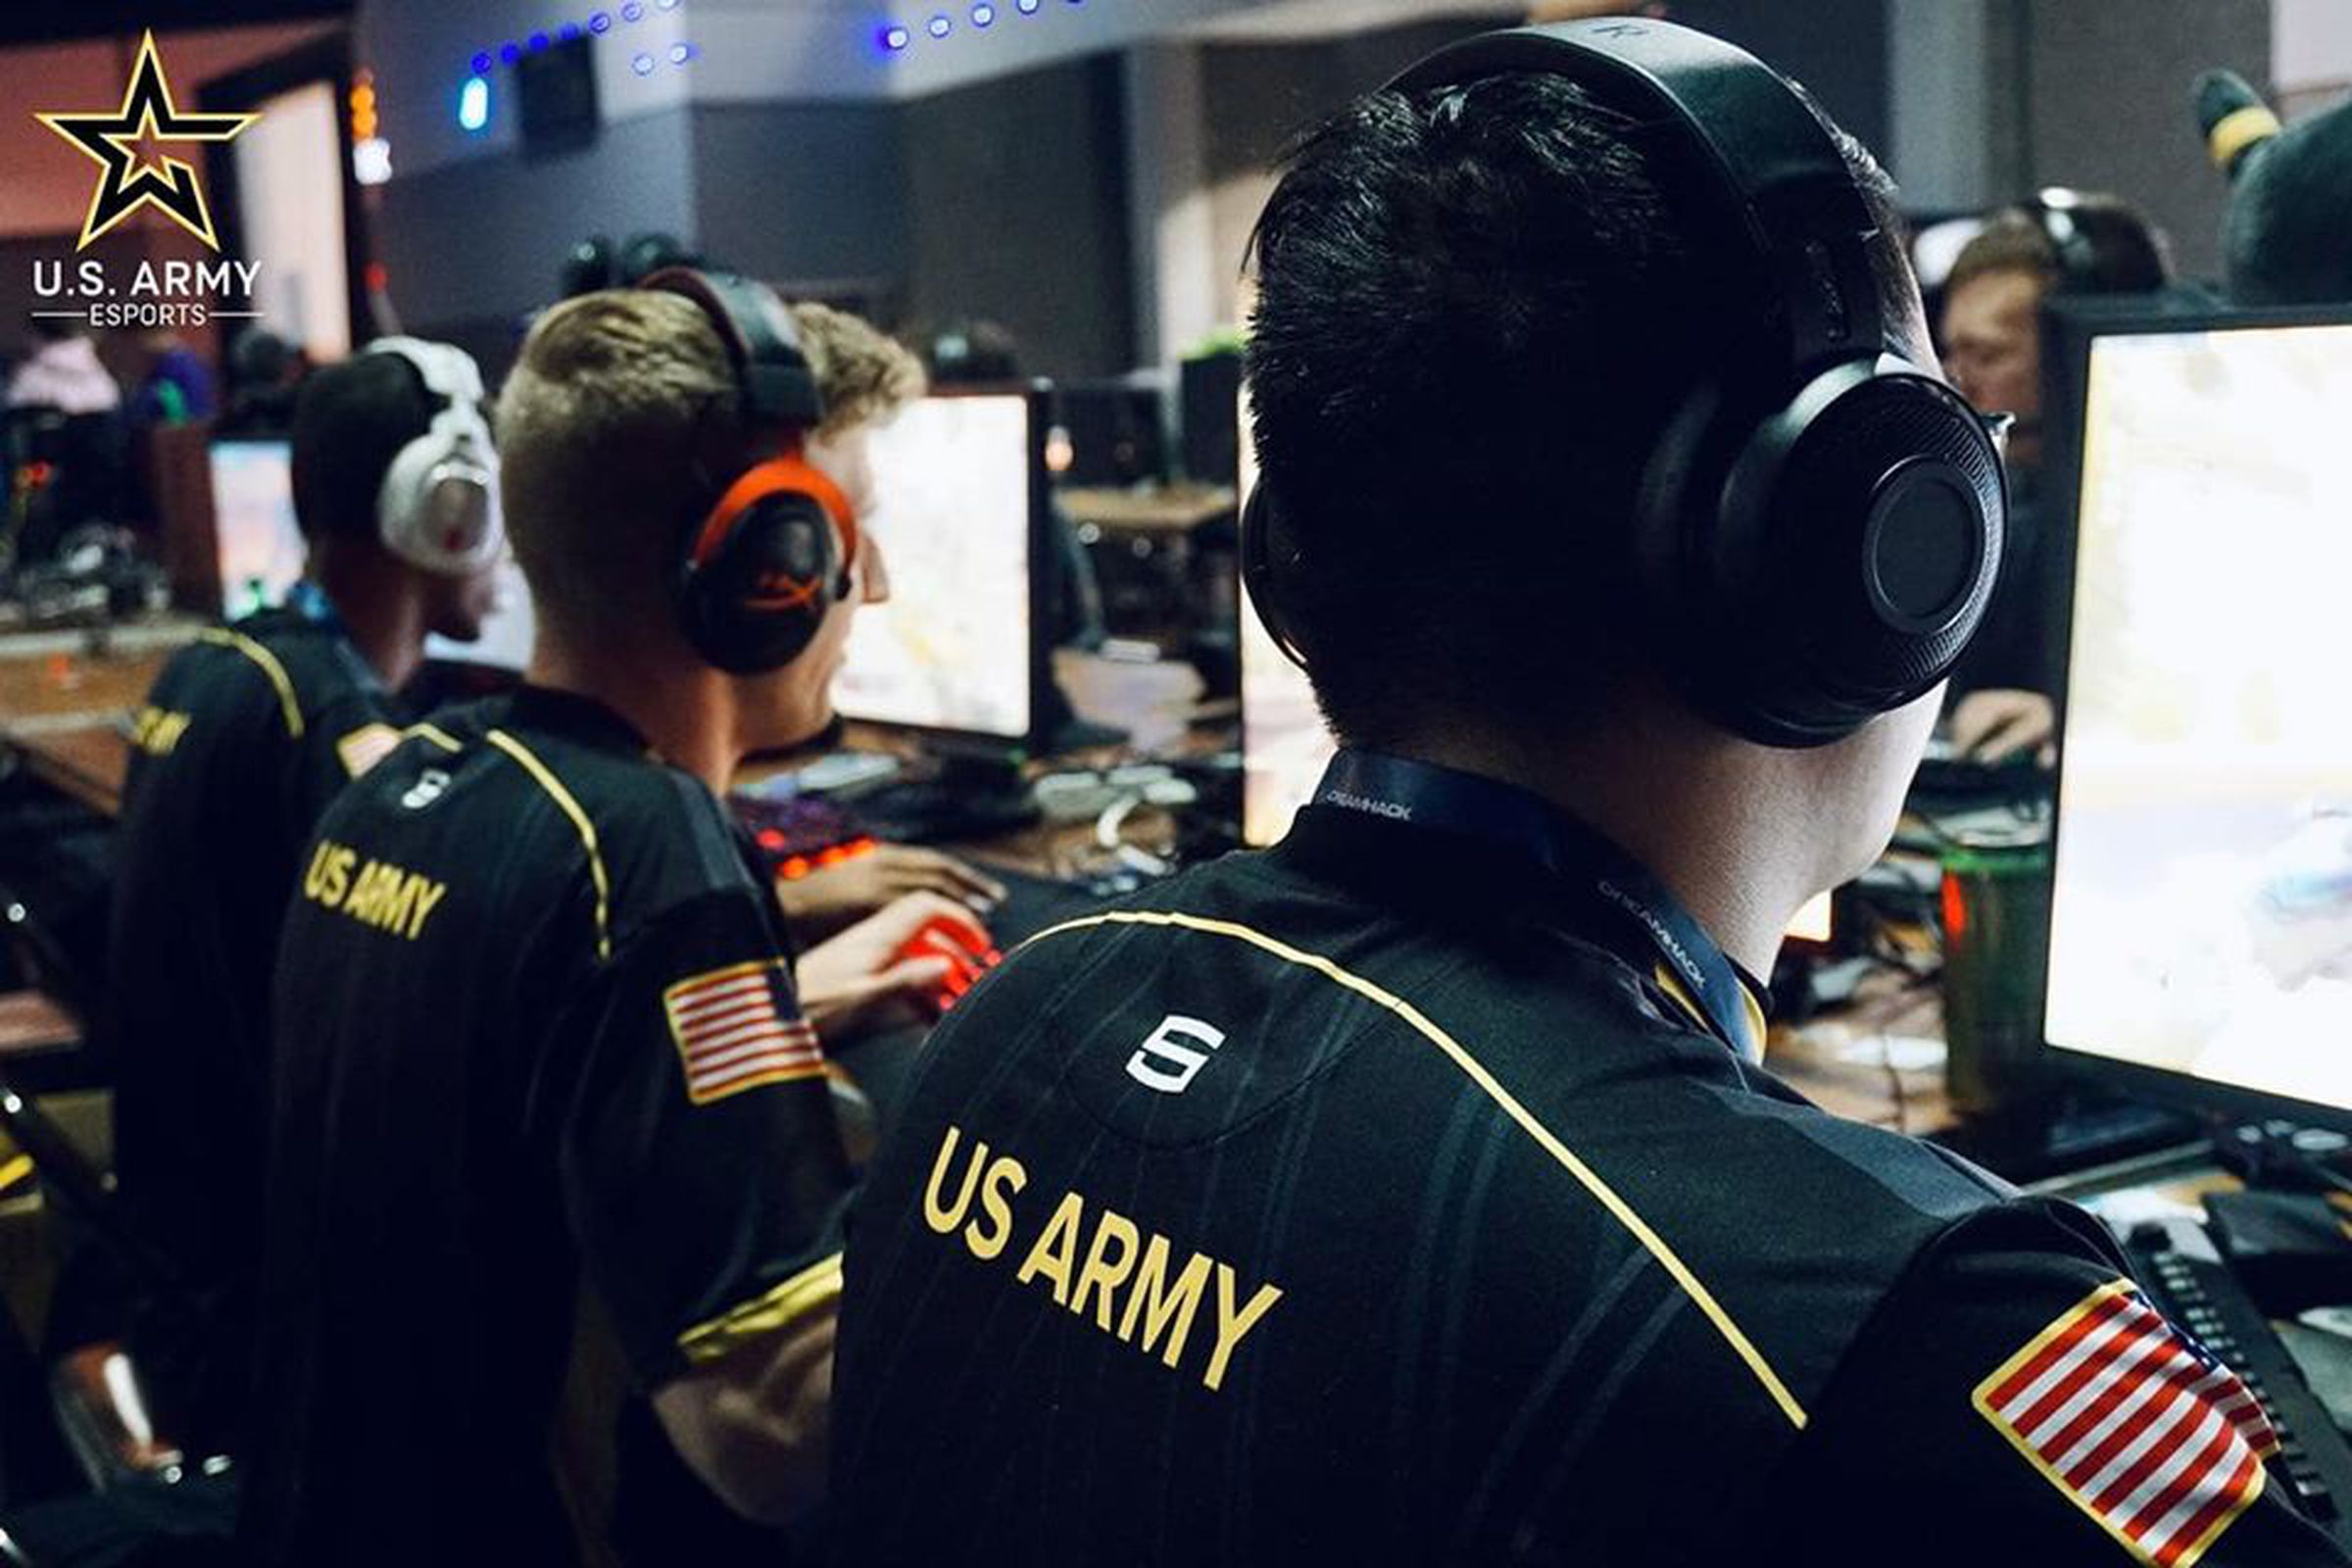 The US Army has its own esports team comprised of active-duty soldiers. 